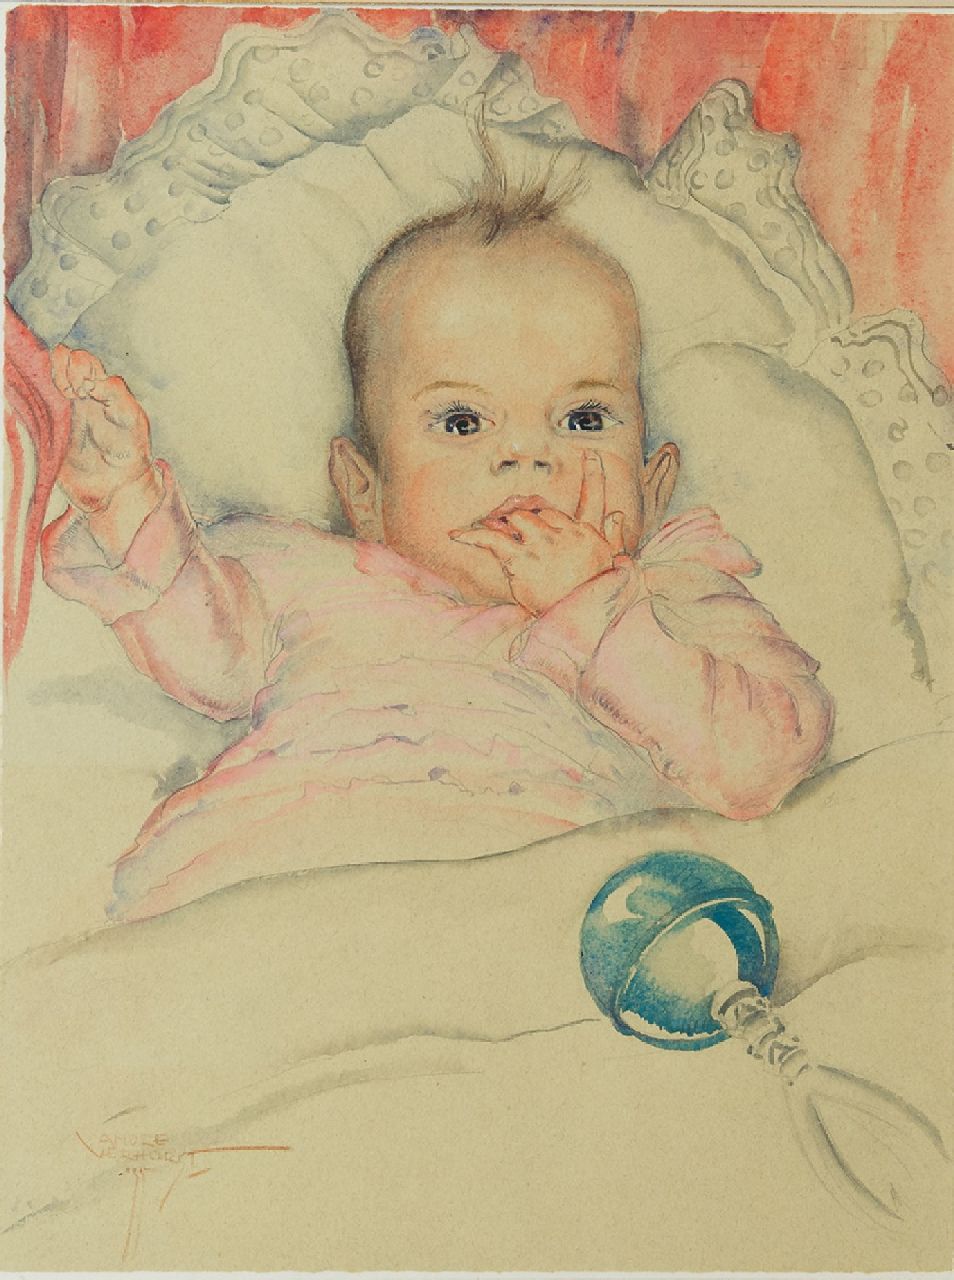 Verhorst A.J.  | Andreas Jacobus 'André J.' Verhorst | Watercolours and drawings offered for sale | A baby's portrait of Emmie Reijnders, pencil and watercolour on paper 44.5 x 33.5 cm, signed l.l. and dated '35